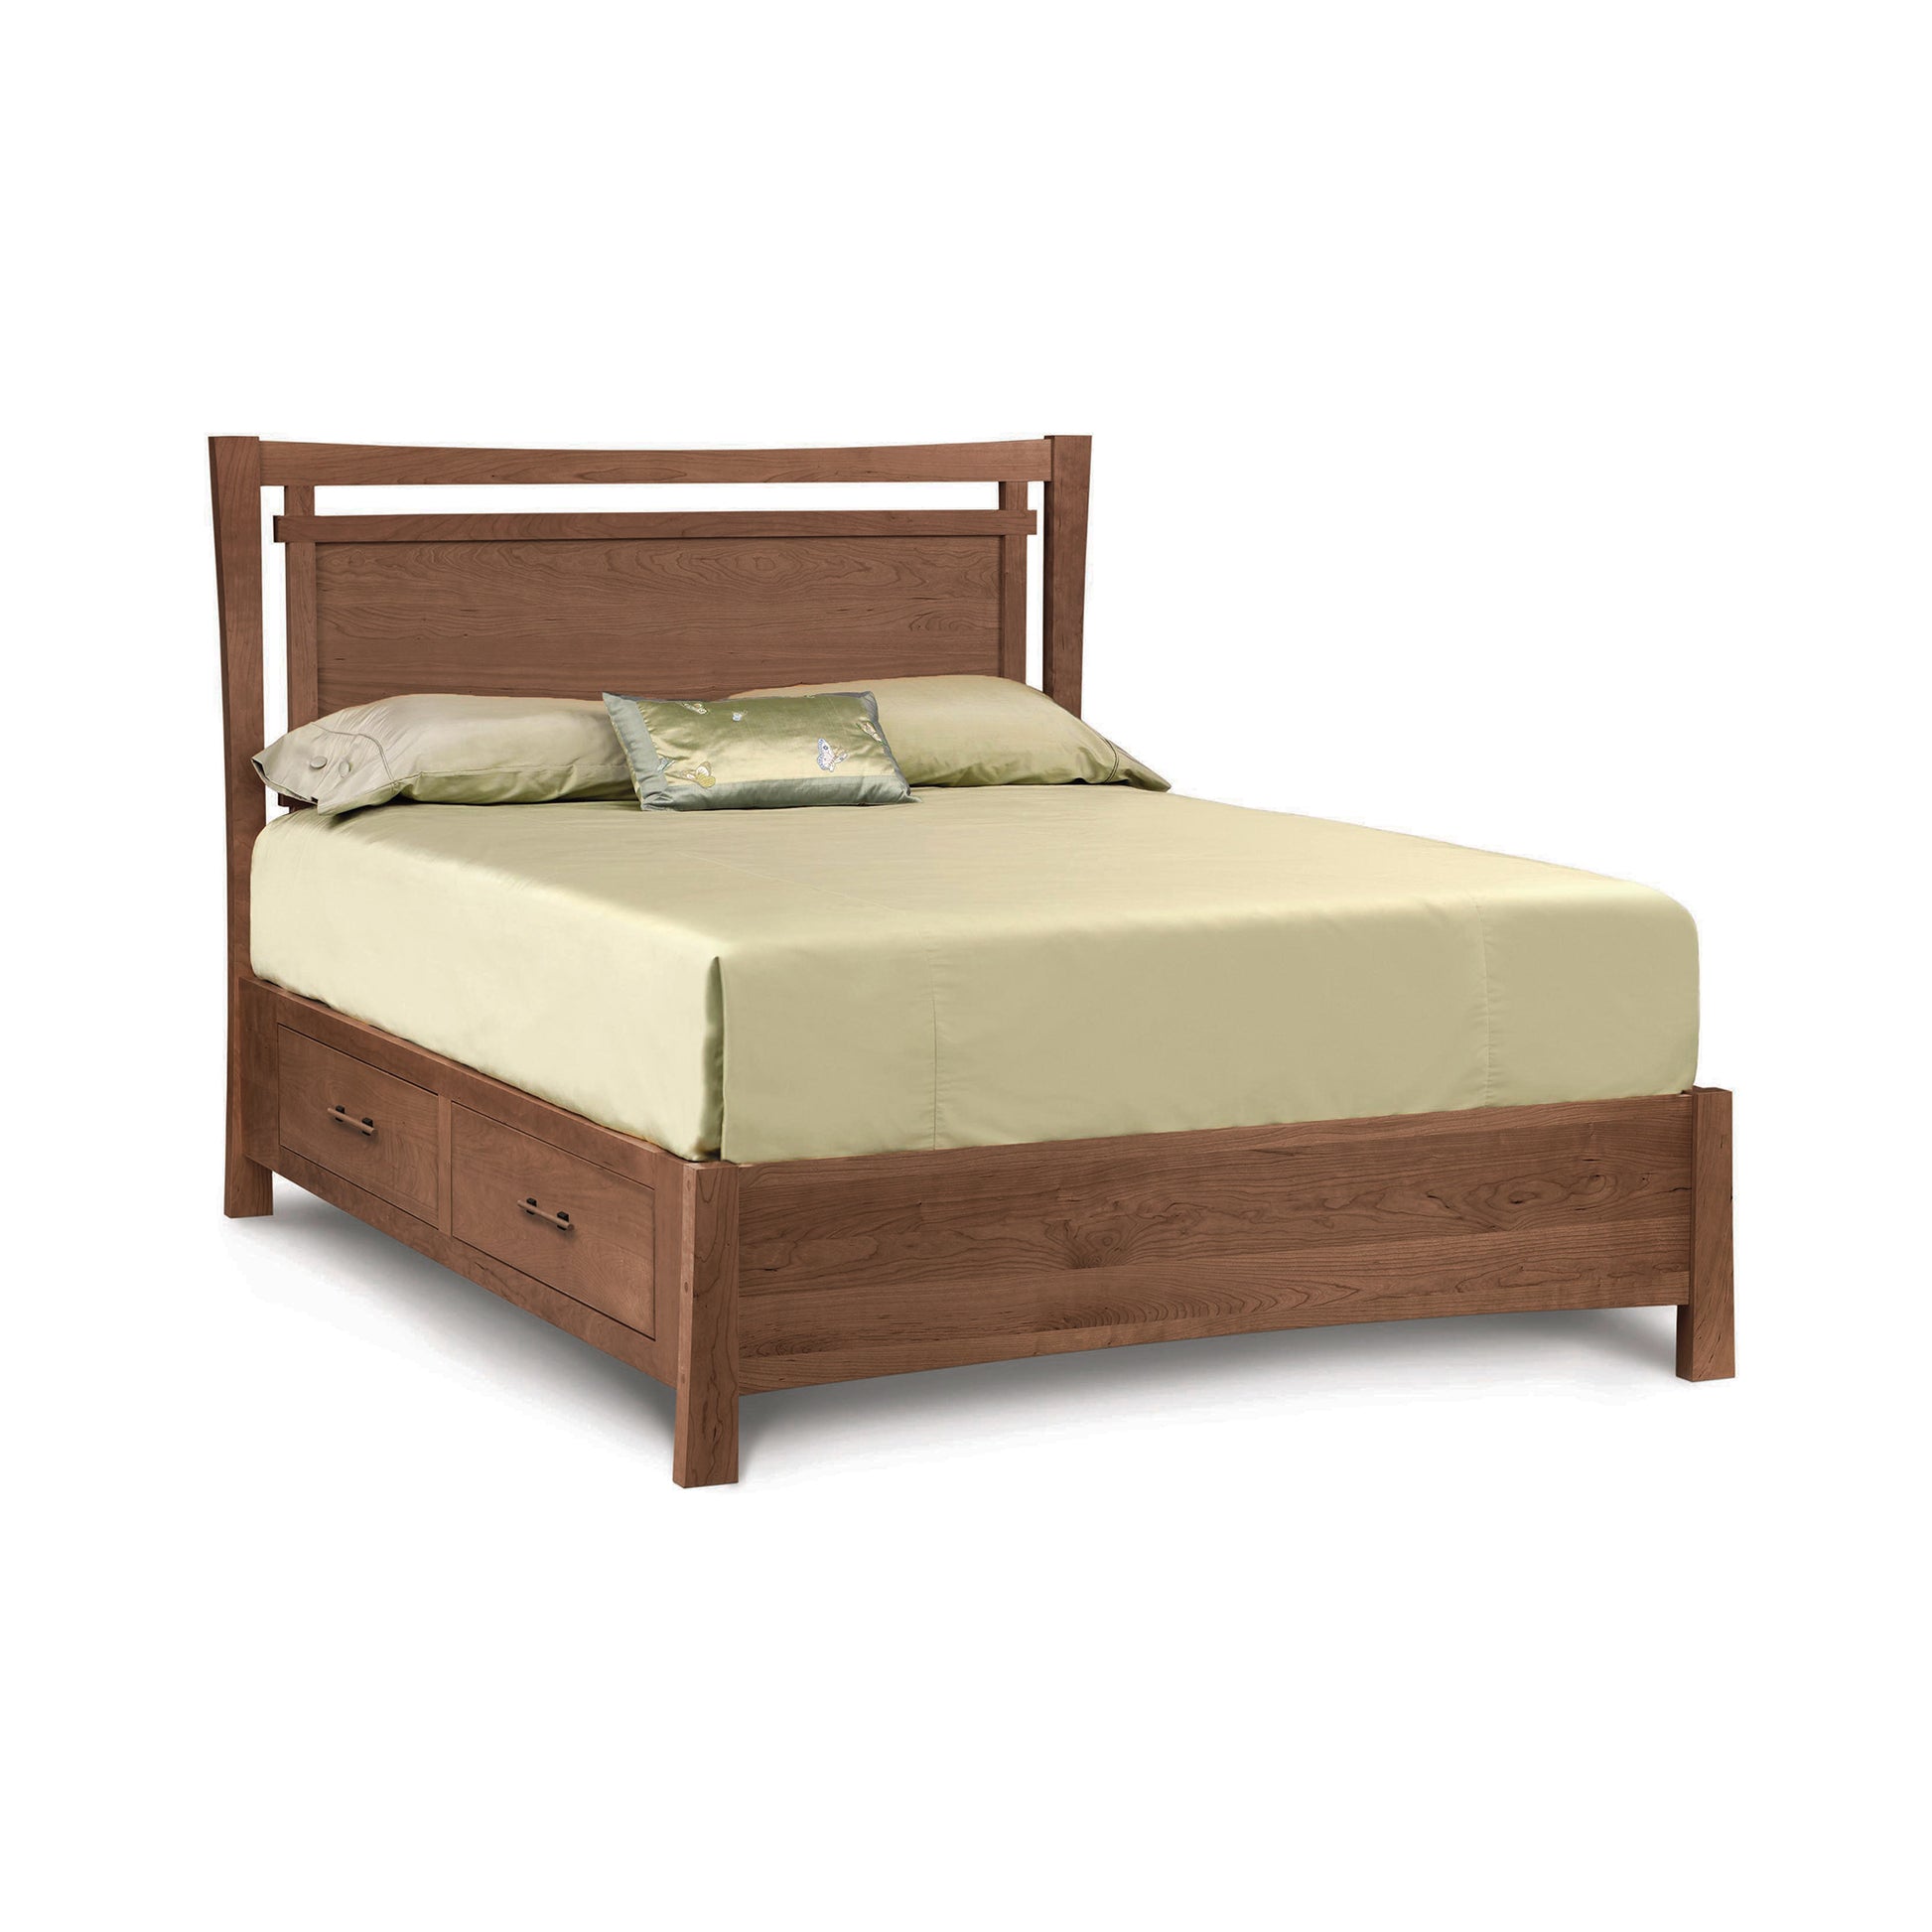 A solid cherry wood queen-sized Copeland Furniture Monterey Storage Bed frame with underbed storage, a light green sheet set, and a single decorative pillow.